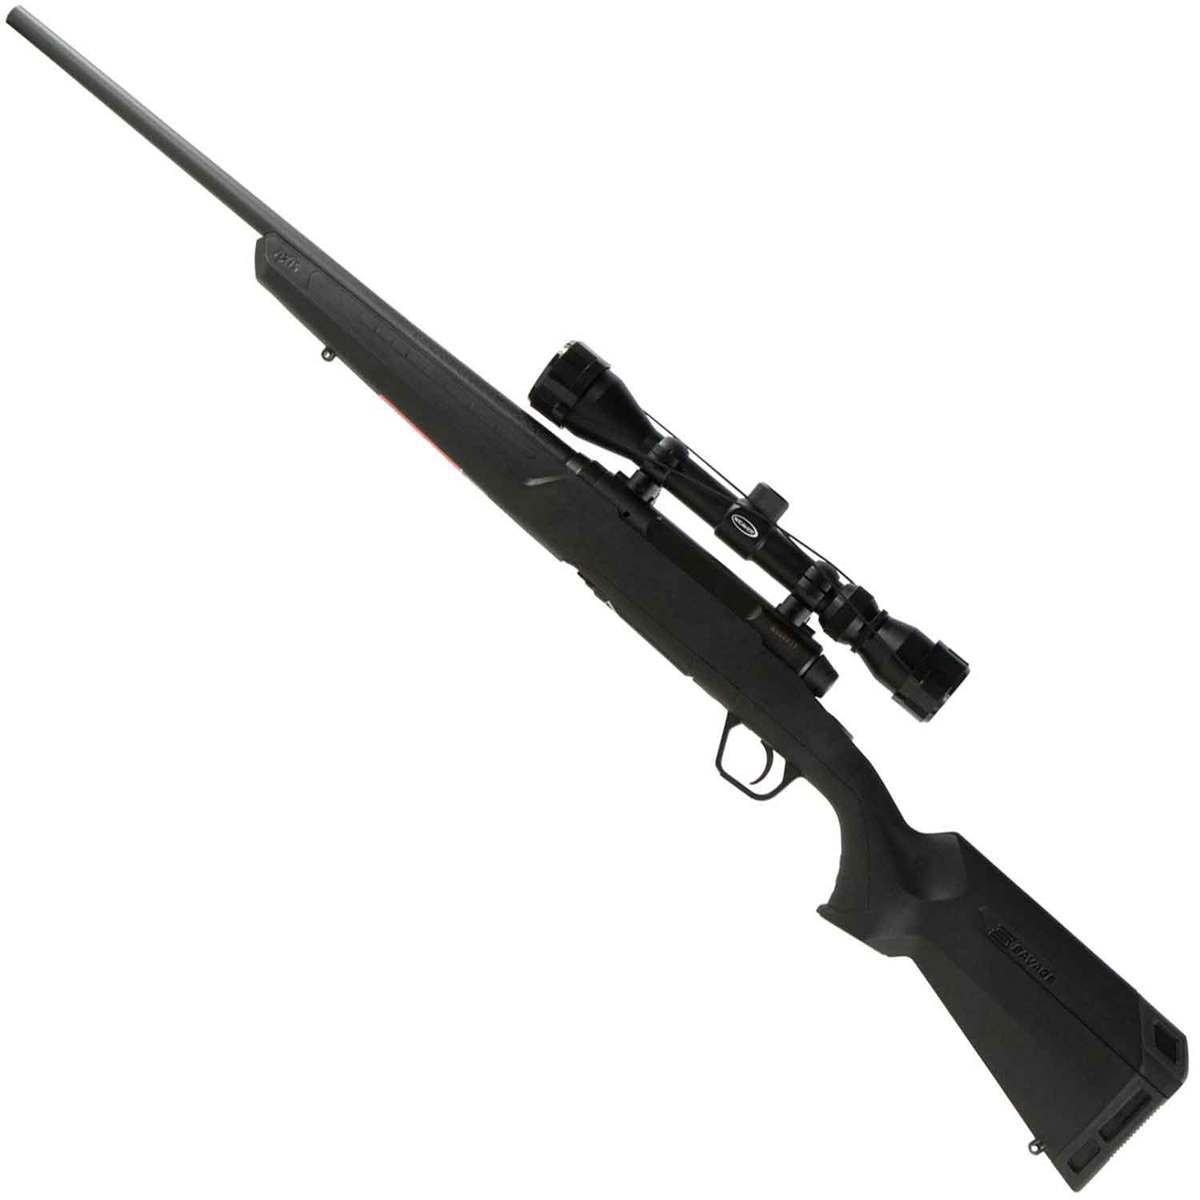 Savage Arms Axis Xp Compact With Weaver Scope Black Bolt Action Rifle 470